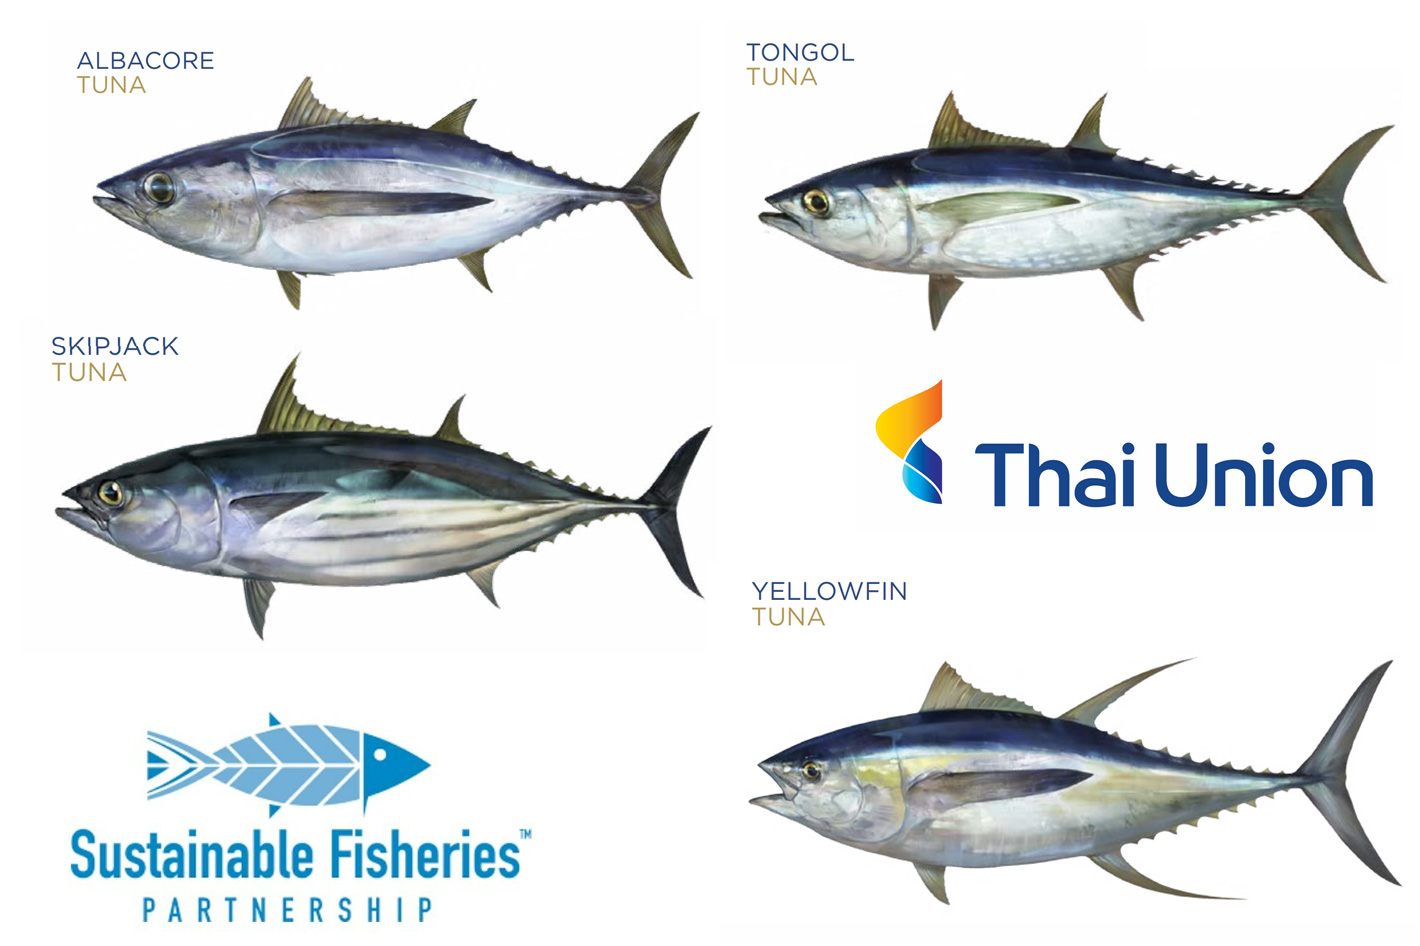 Tuna longline fishing needs to do more to protect endangered